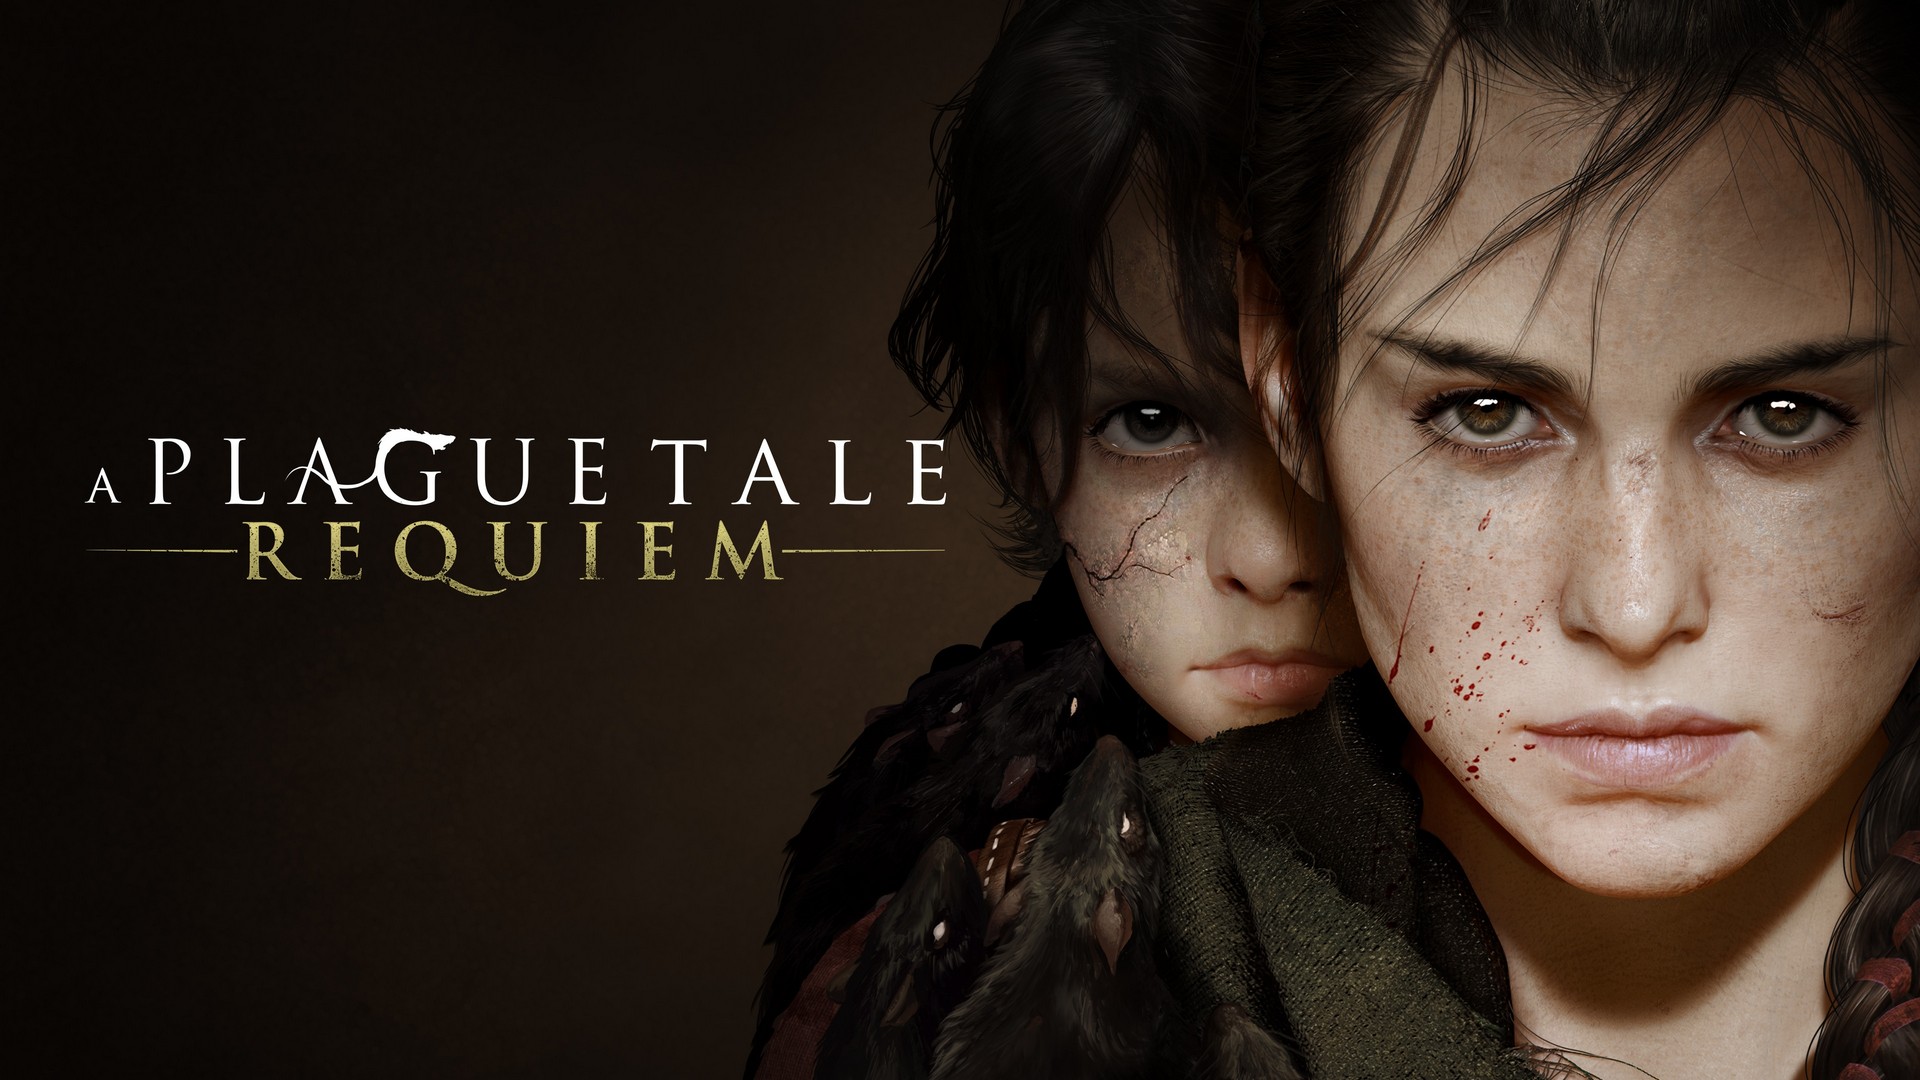 A Plague Tale: Requiem Announces Over One Million Players With A One-Of-A-Kind Accolades Trailer